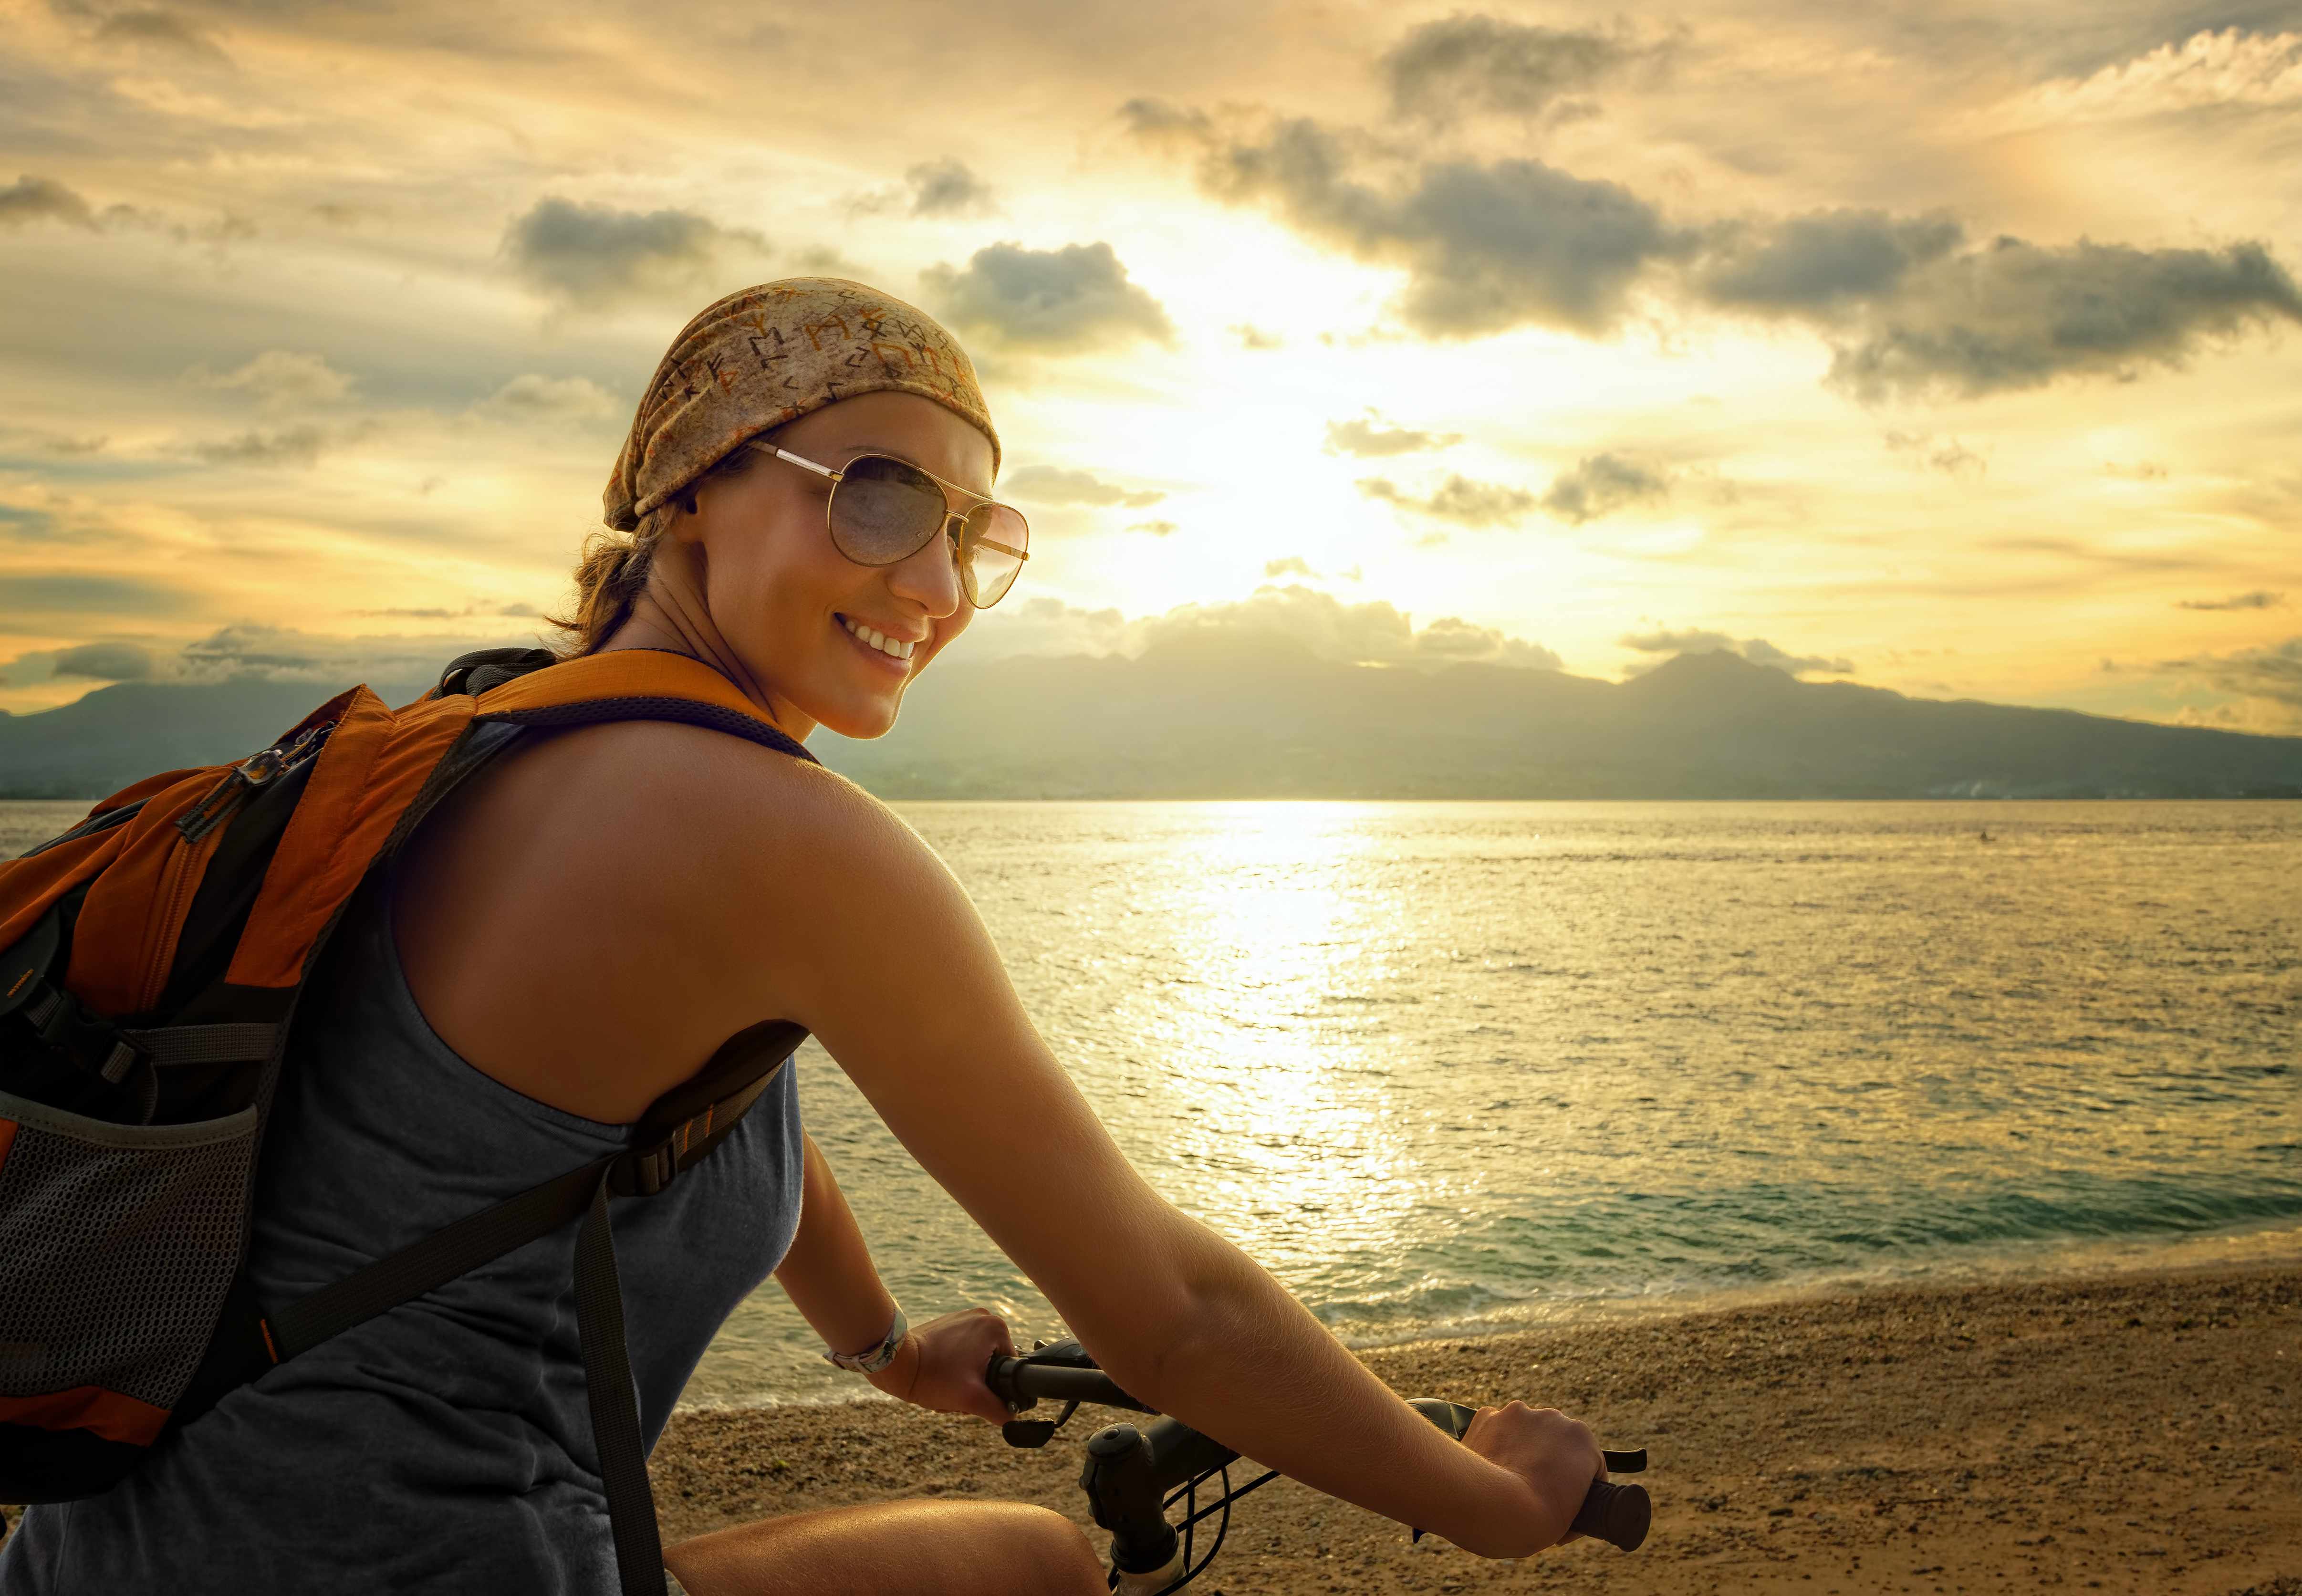 a young woman riding a bicycle along the beach or lake shore with the sun setting